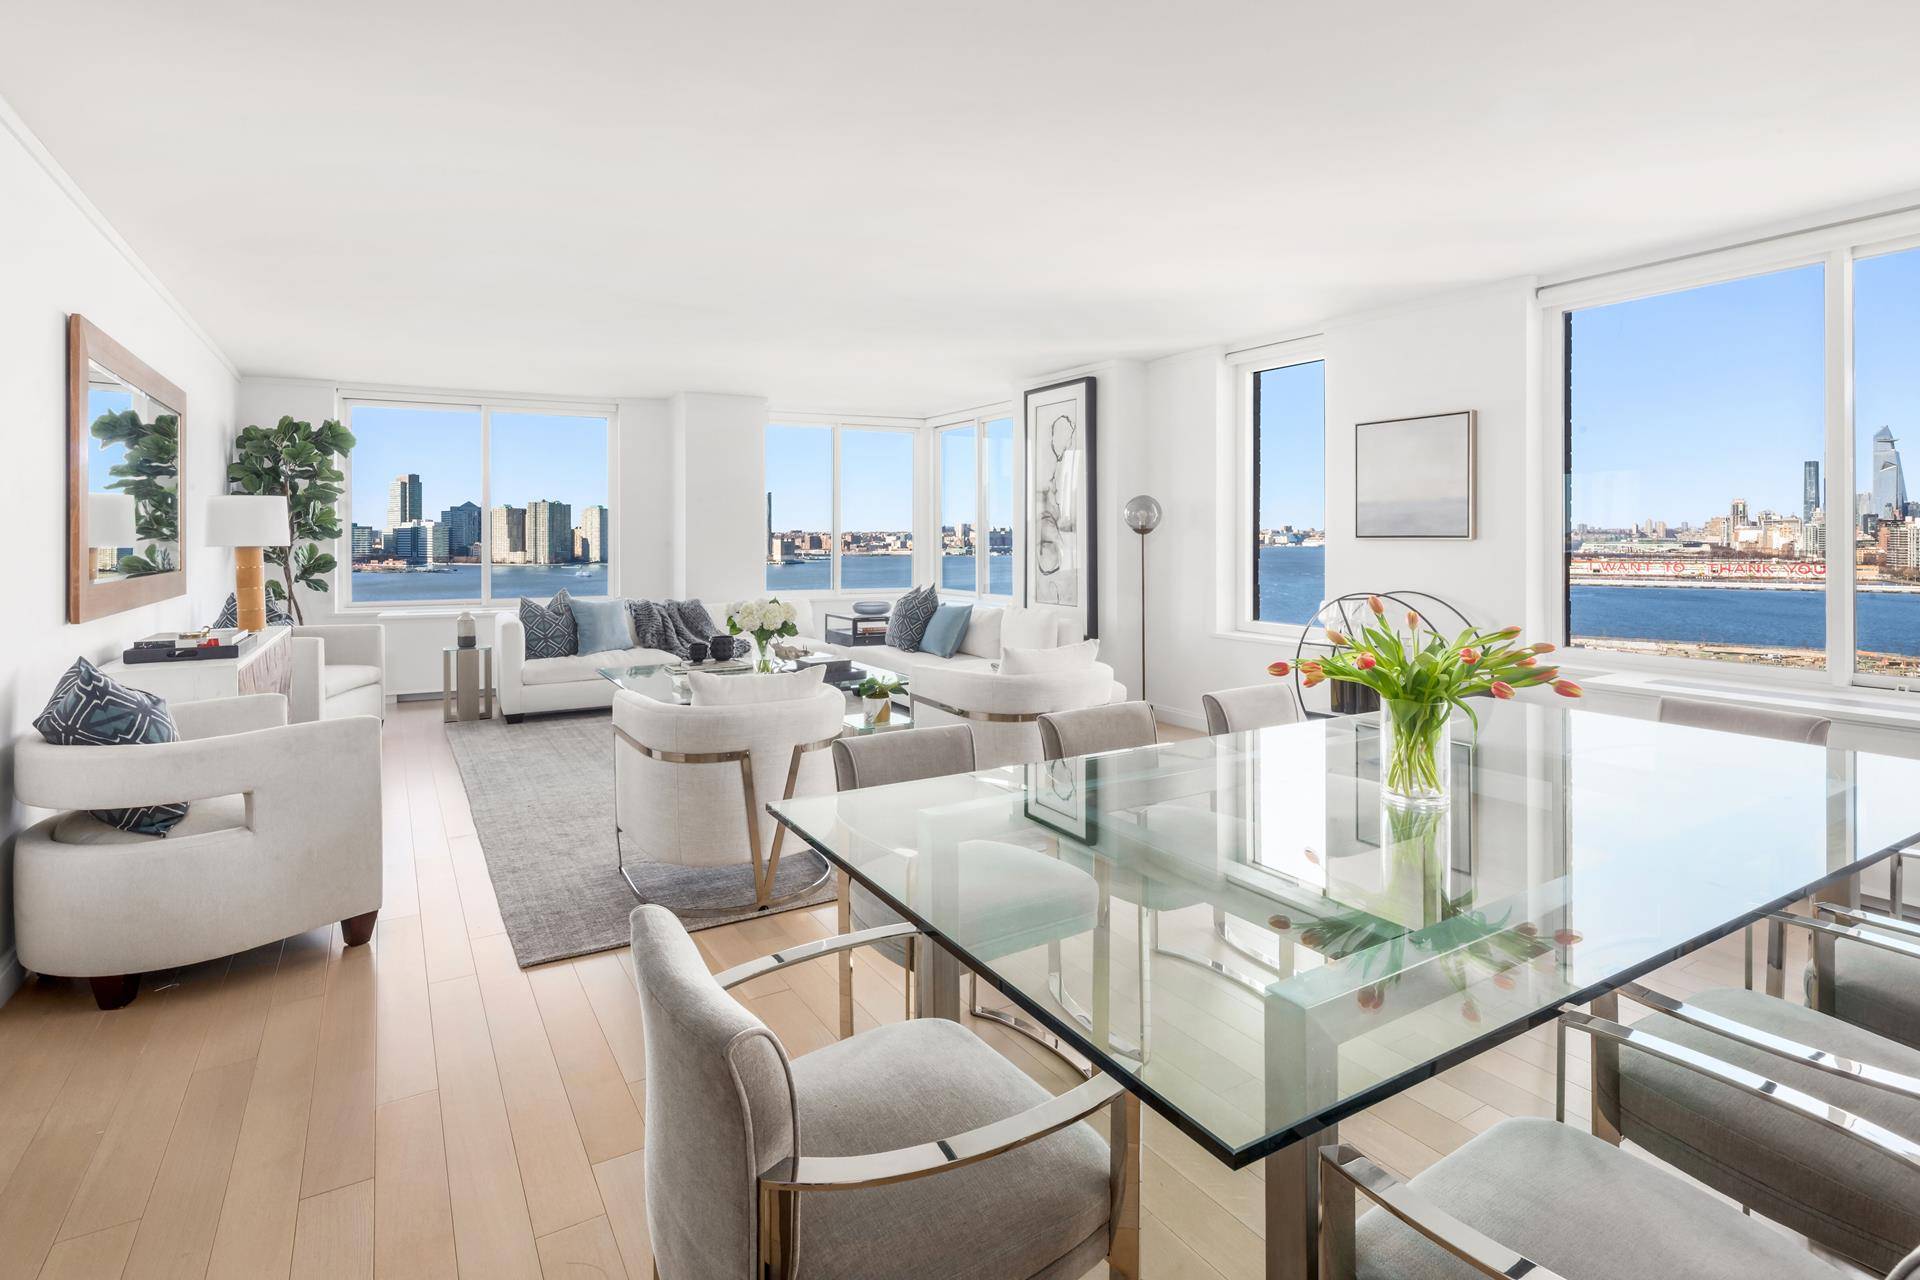 Enjoy Panoramic Hudson river views from this stunning 5 bedroom 4.